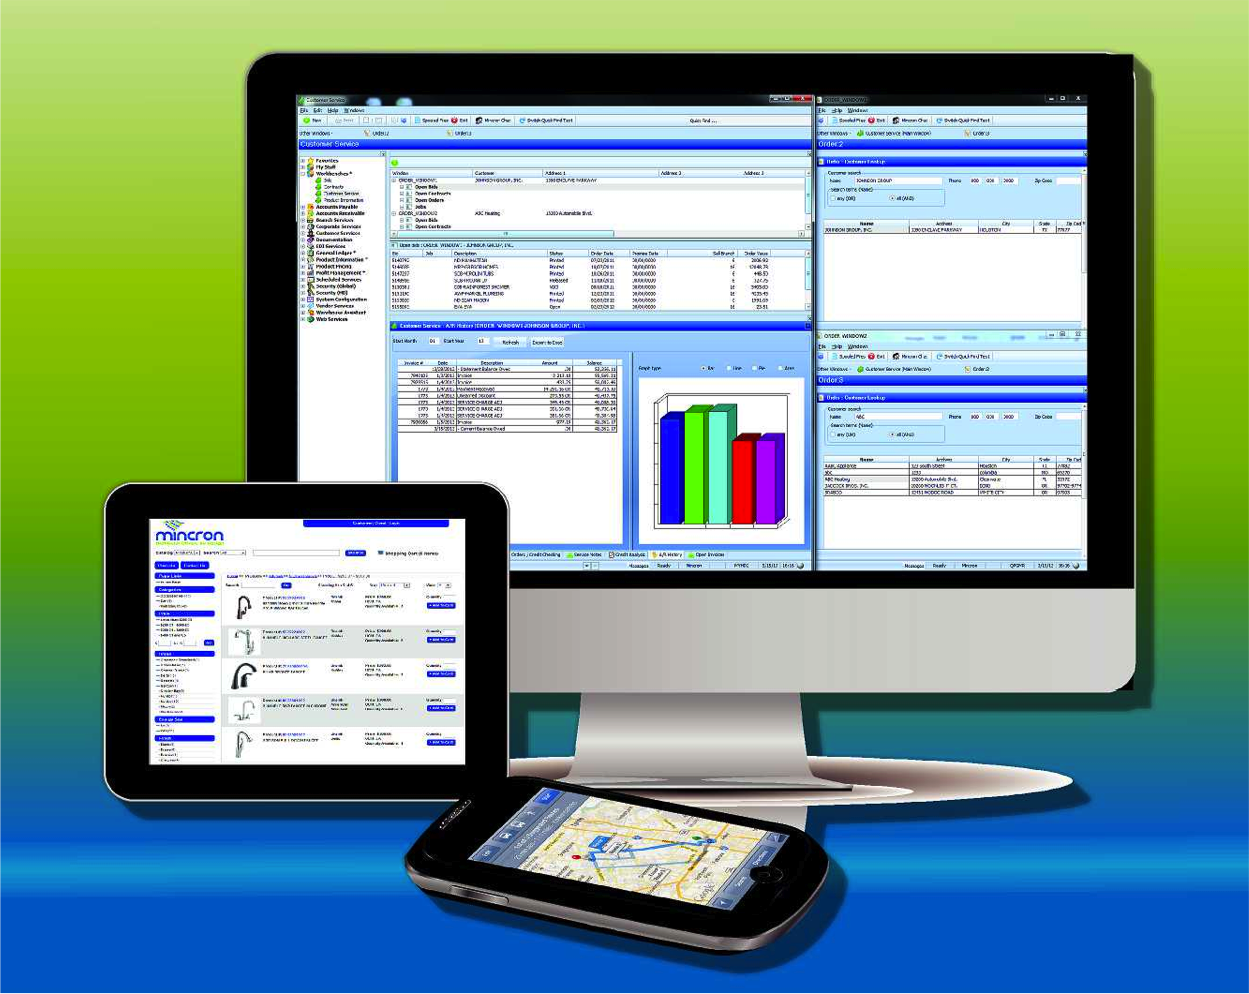 Mincron provides an industry-leading full ERP system with web and mobile solutions